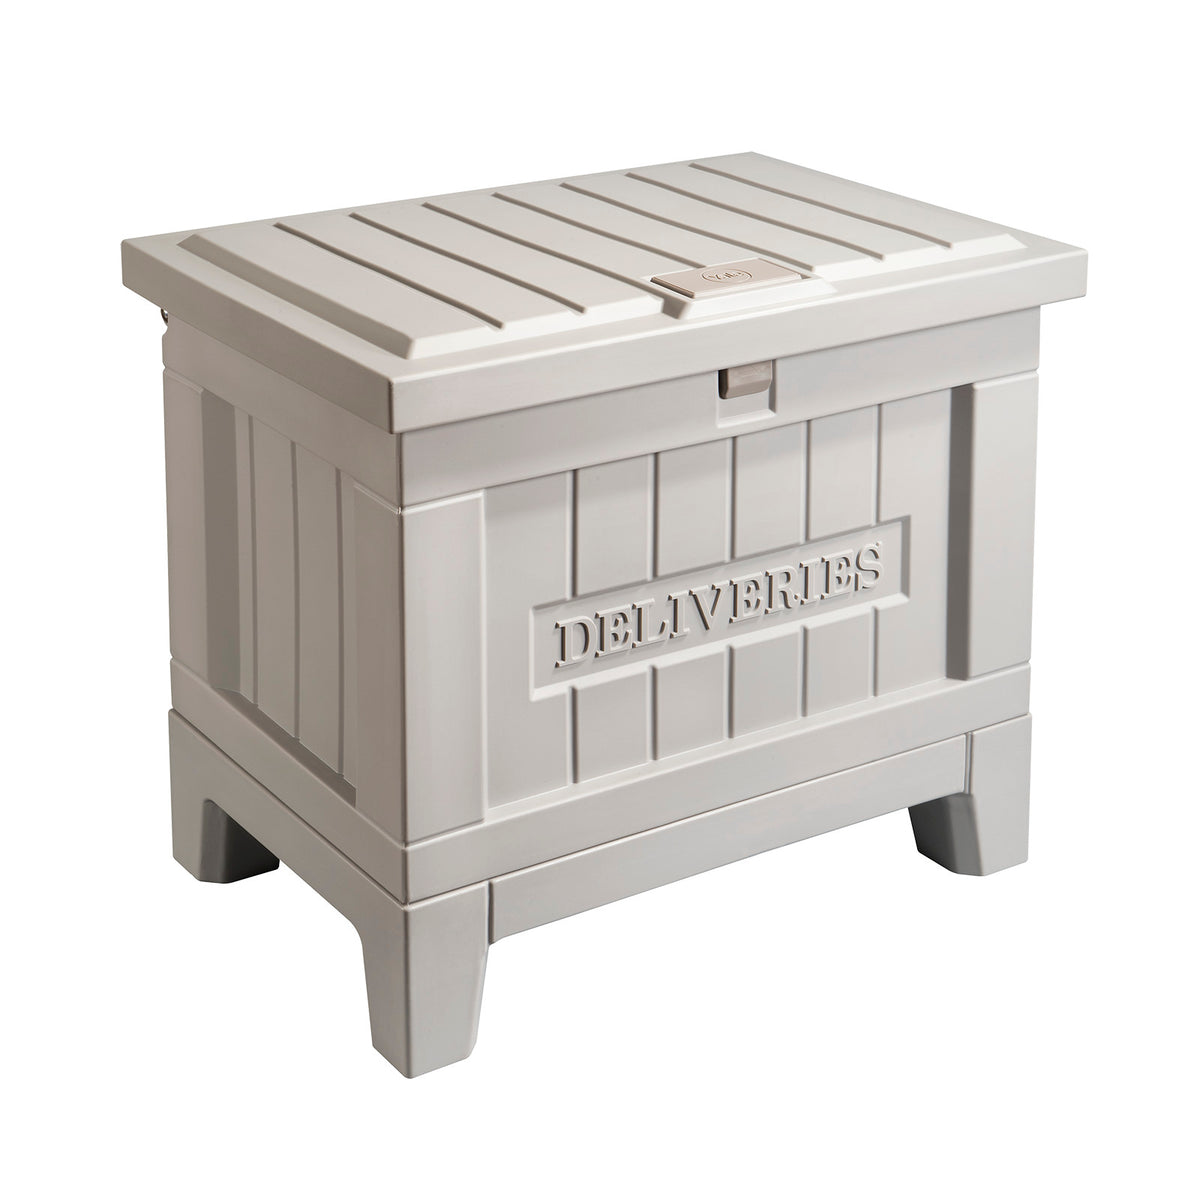 Yale Smart Delivery Box - Manor Gray, Kent Design